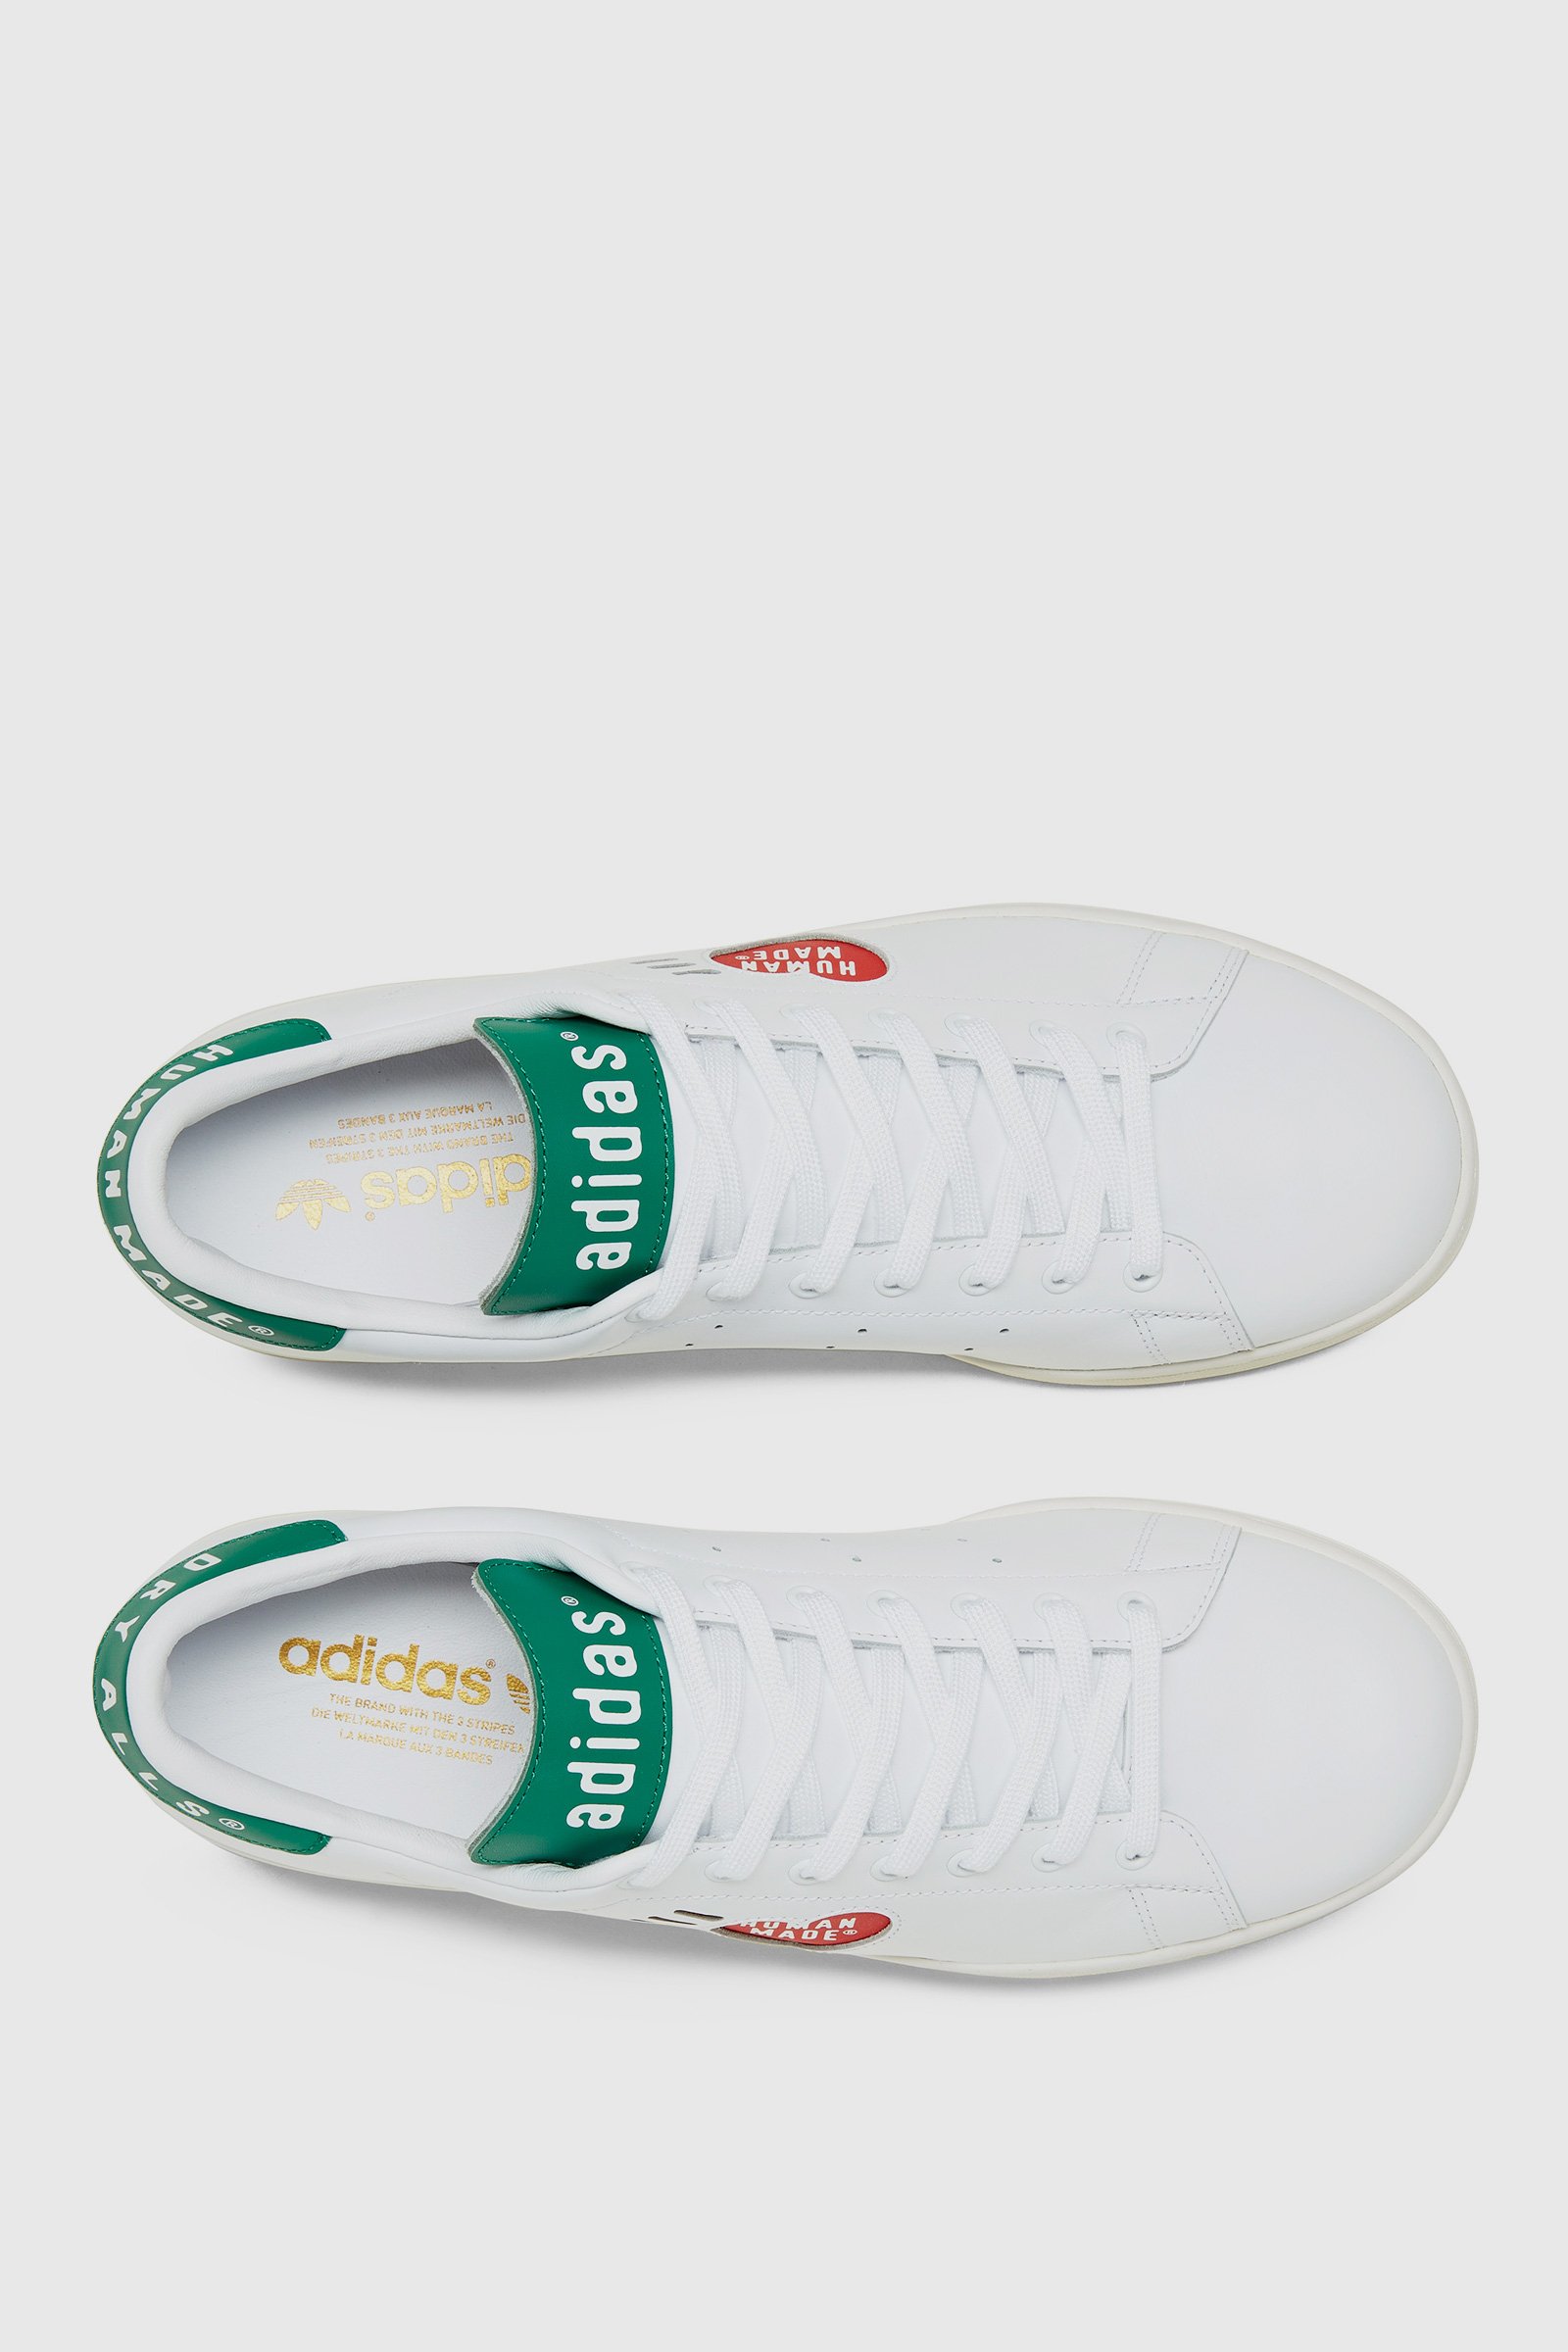 where are stan smiths made